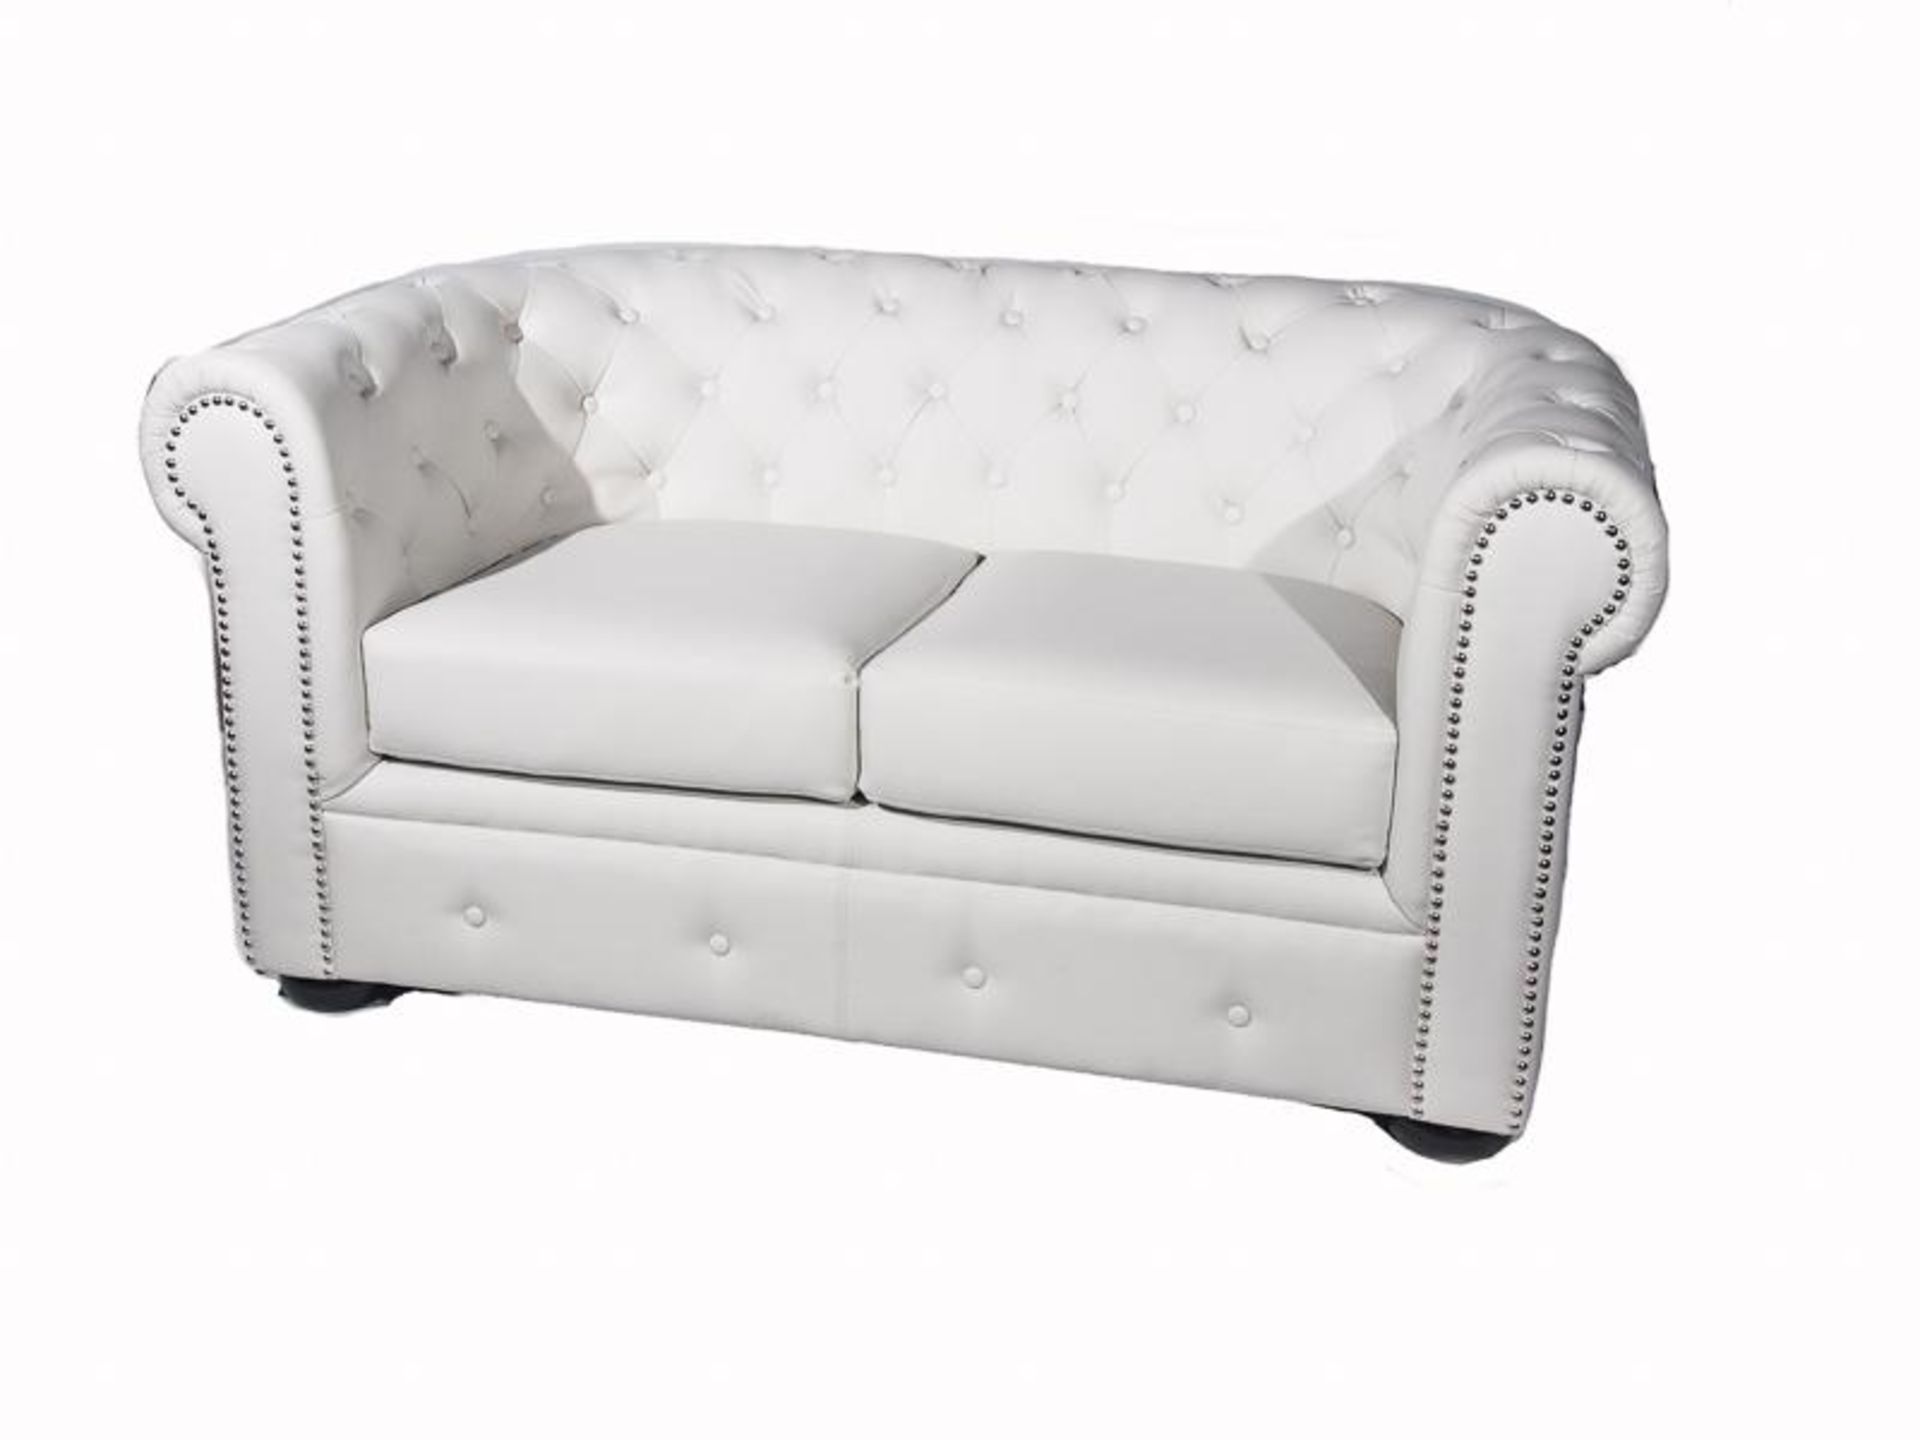 2 Seater Chesterfield Sofa White Faux Leather